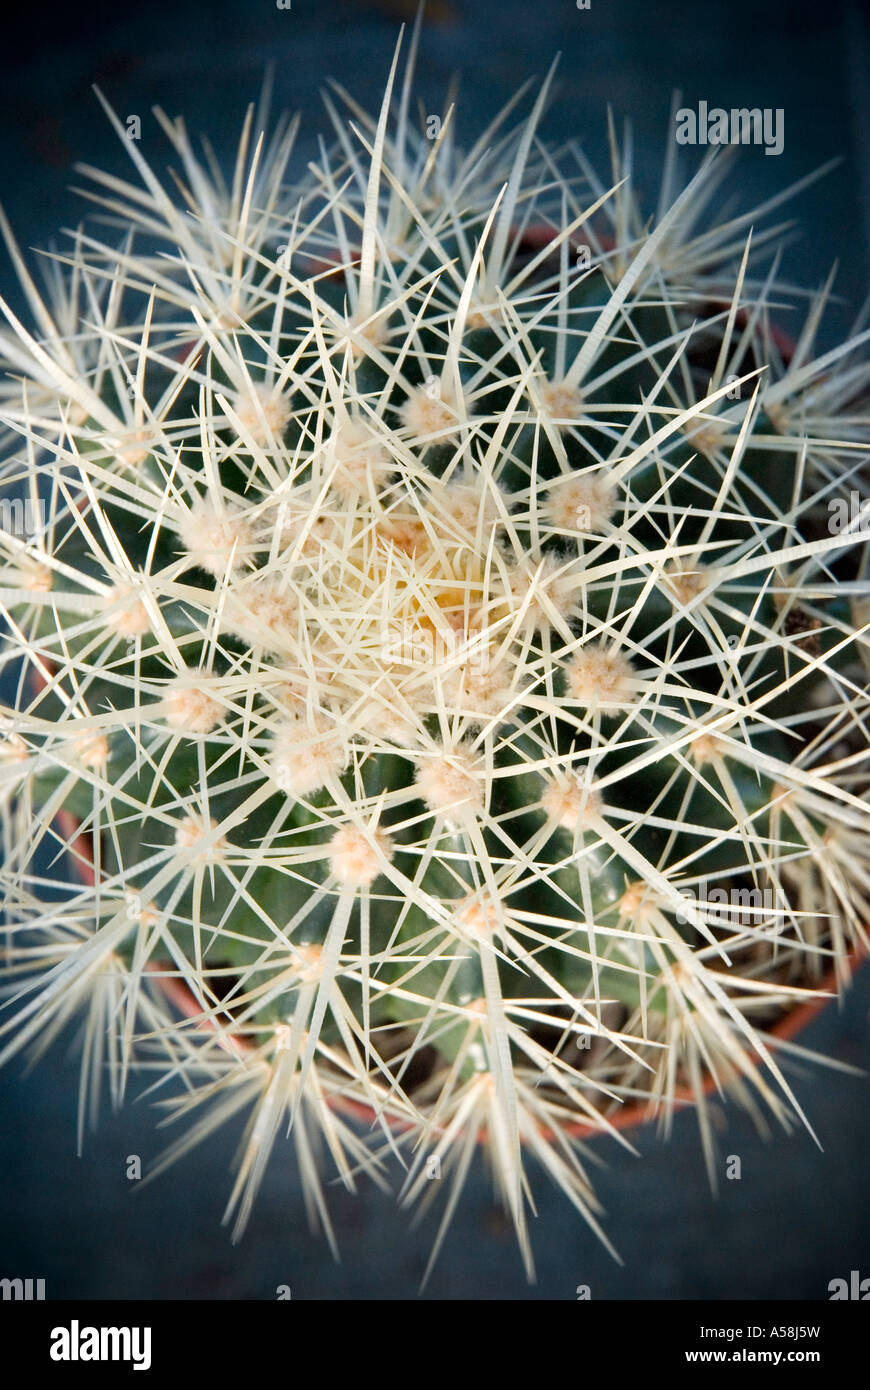 Looking down on a Cactus plant Stock Photo